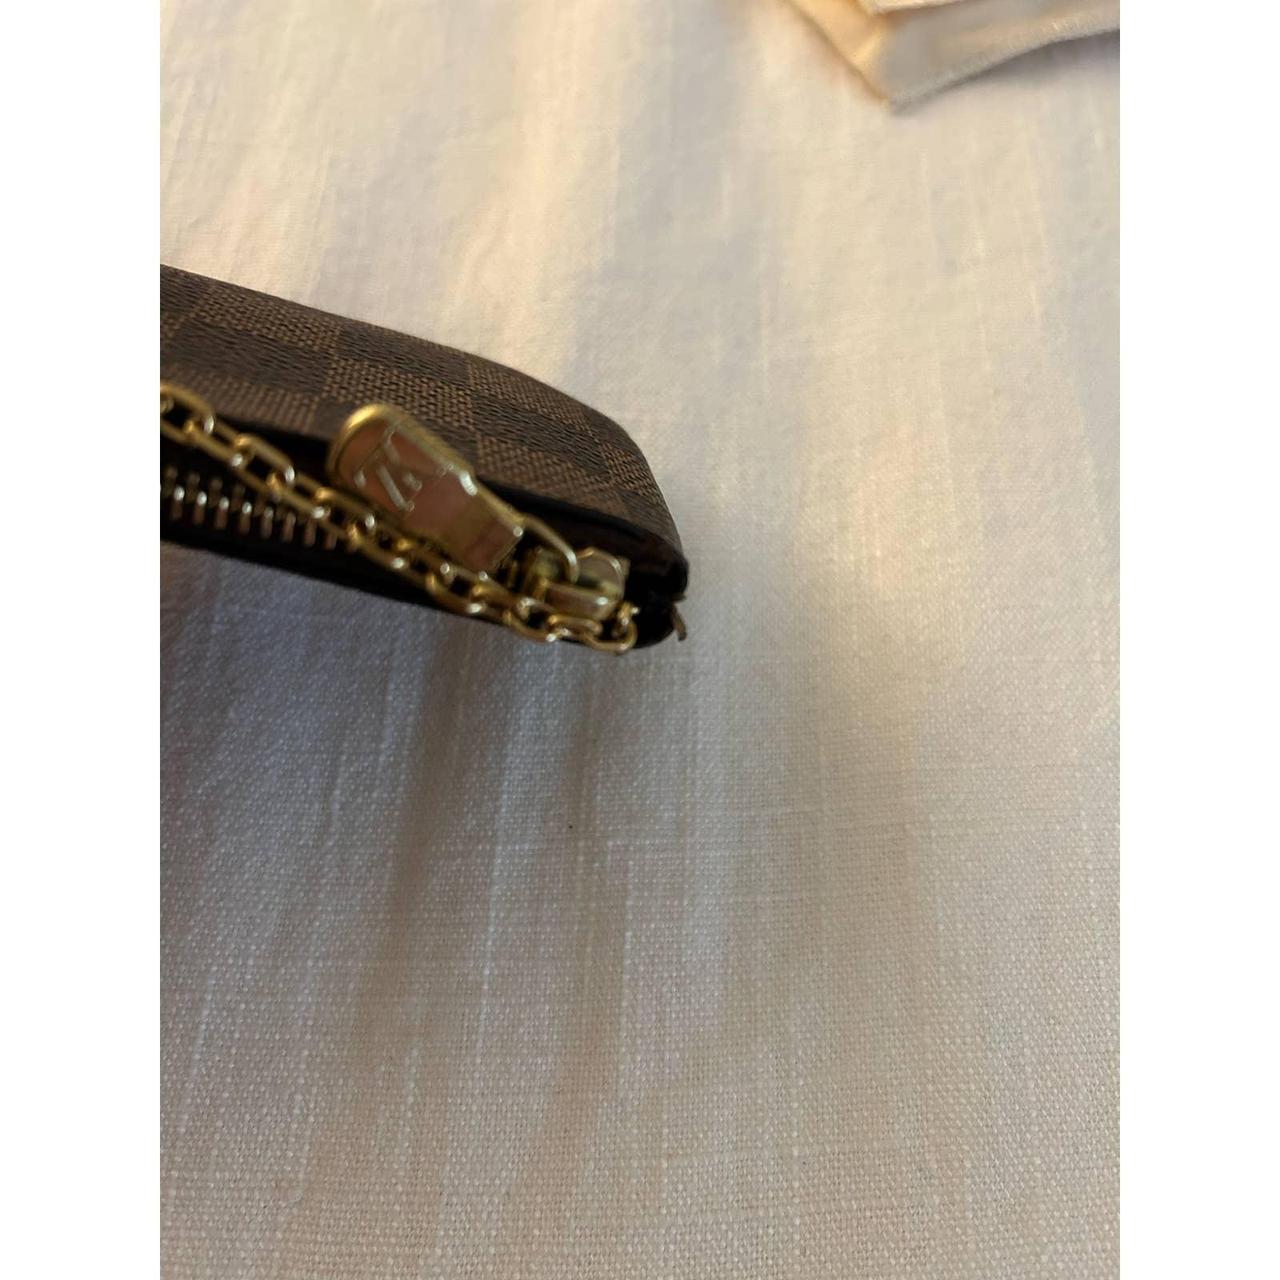 LV wallet Have receipt and tags that came with it - Depop